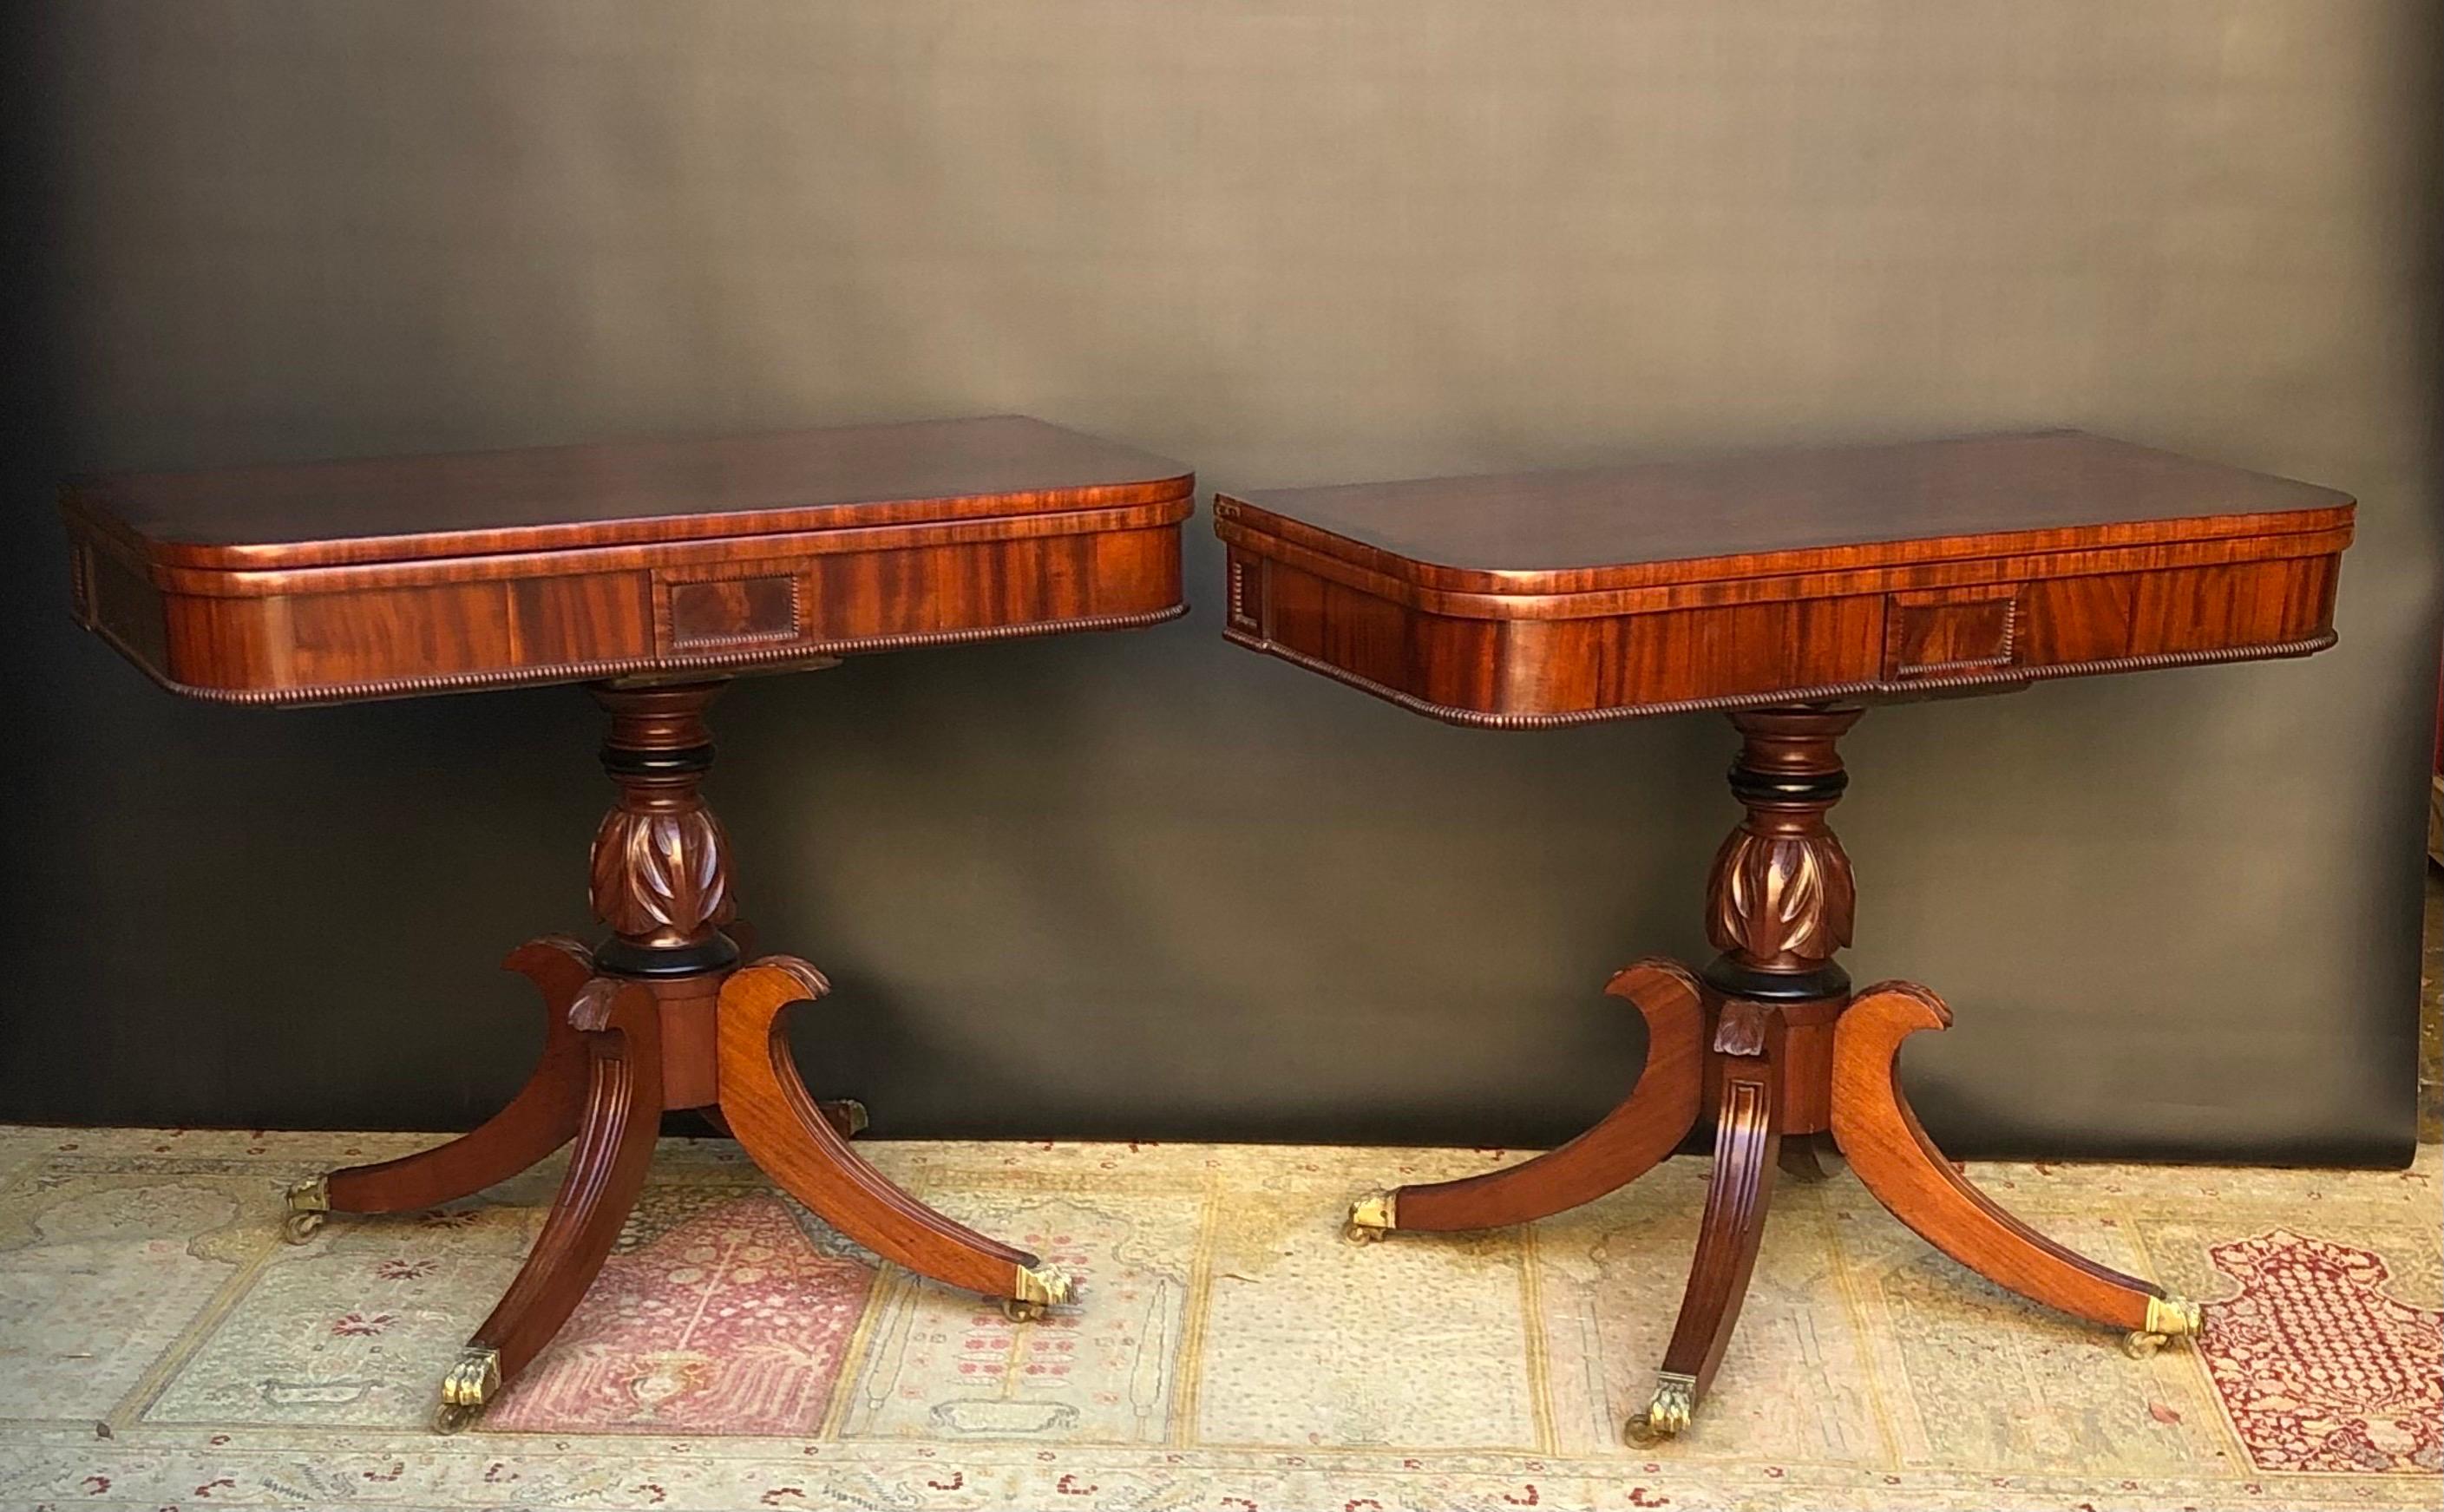 This Regal pair of English Regency Mahogany Card Tables  / Tea Tables with Rosewood Crossbanding are made in the first quarter of the  19th Century.  The English NeoClassical Tea Table top has a highly figured Crotch Mahogany surrounded by elegantly